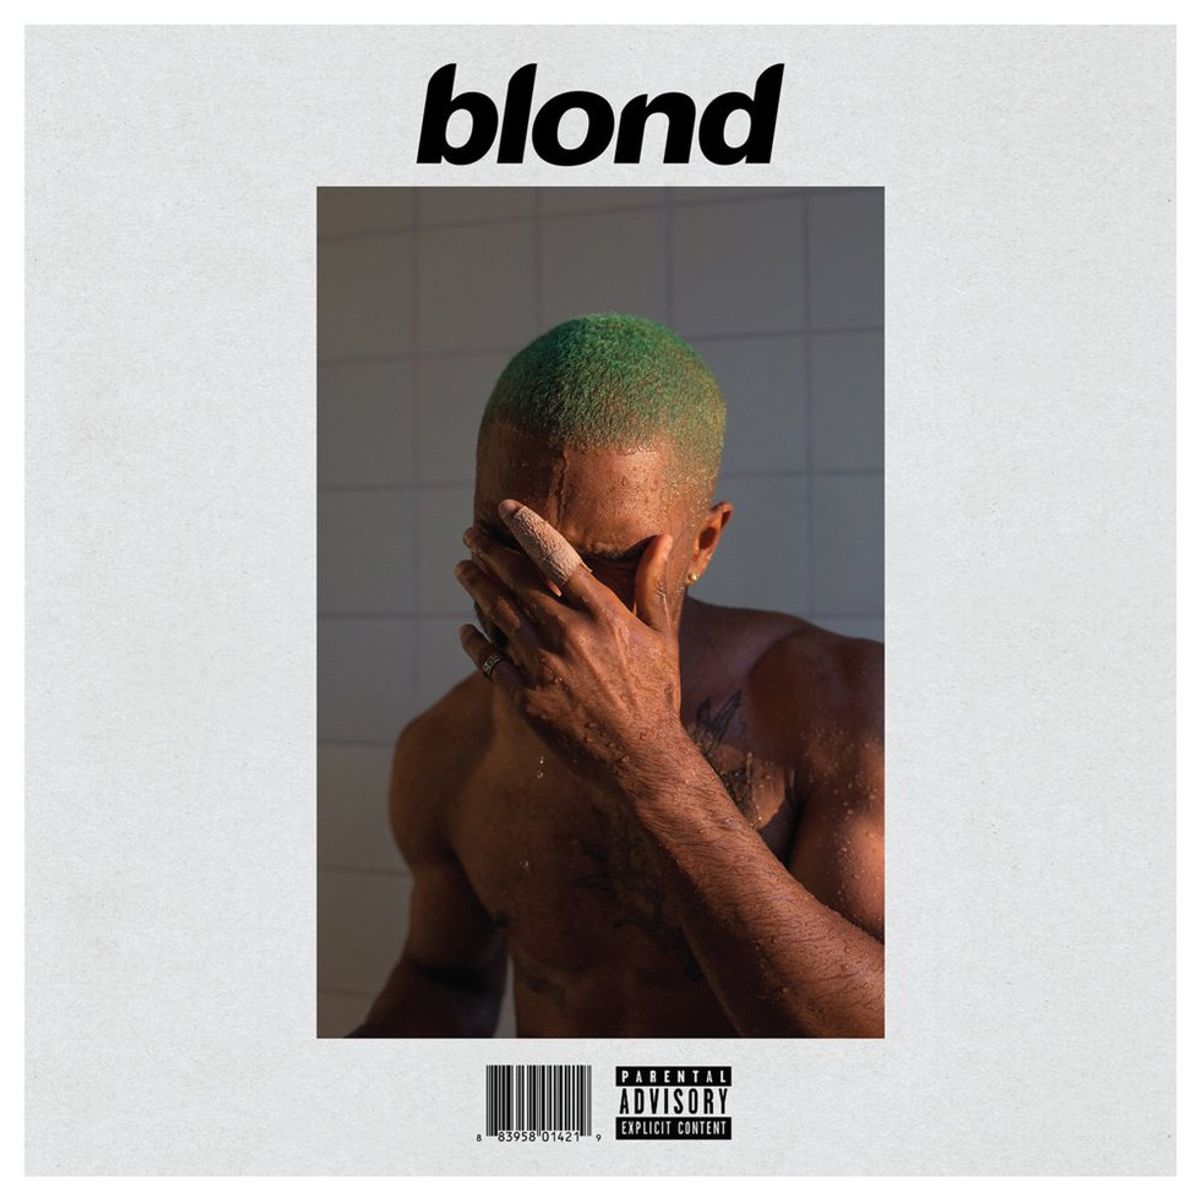 Blonde: Frank Ocean's Wave Of Self-Expression And Unhinged Creativity